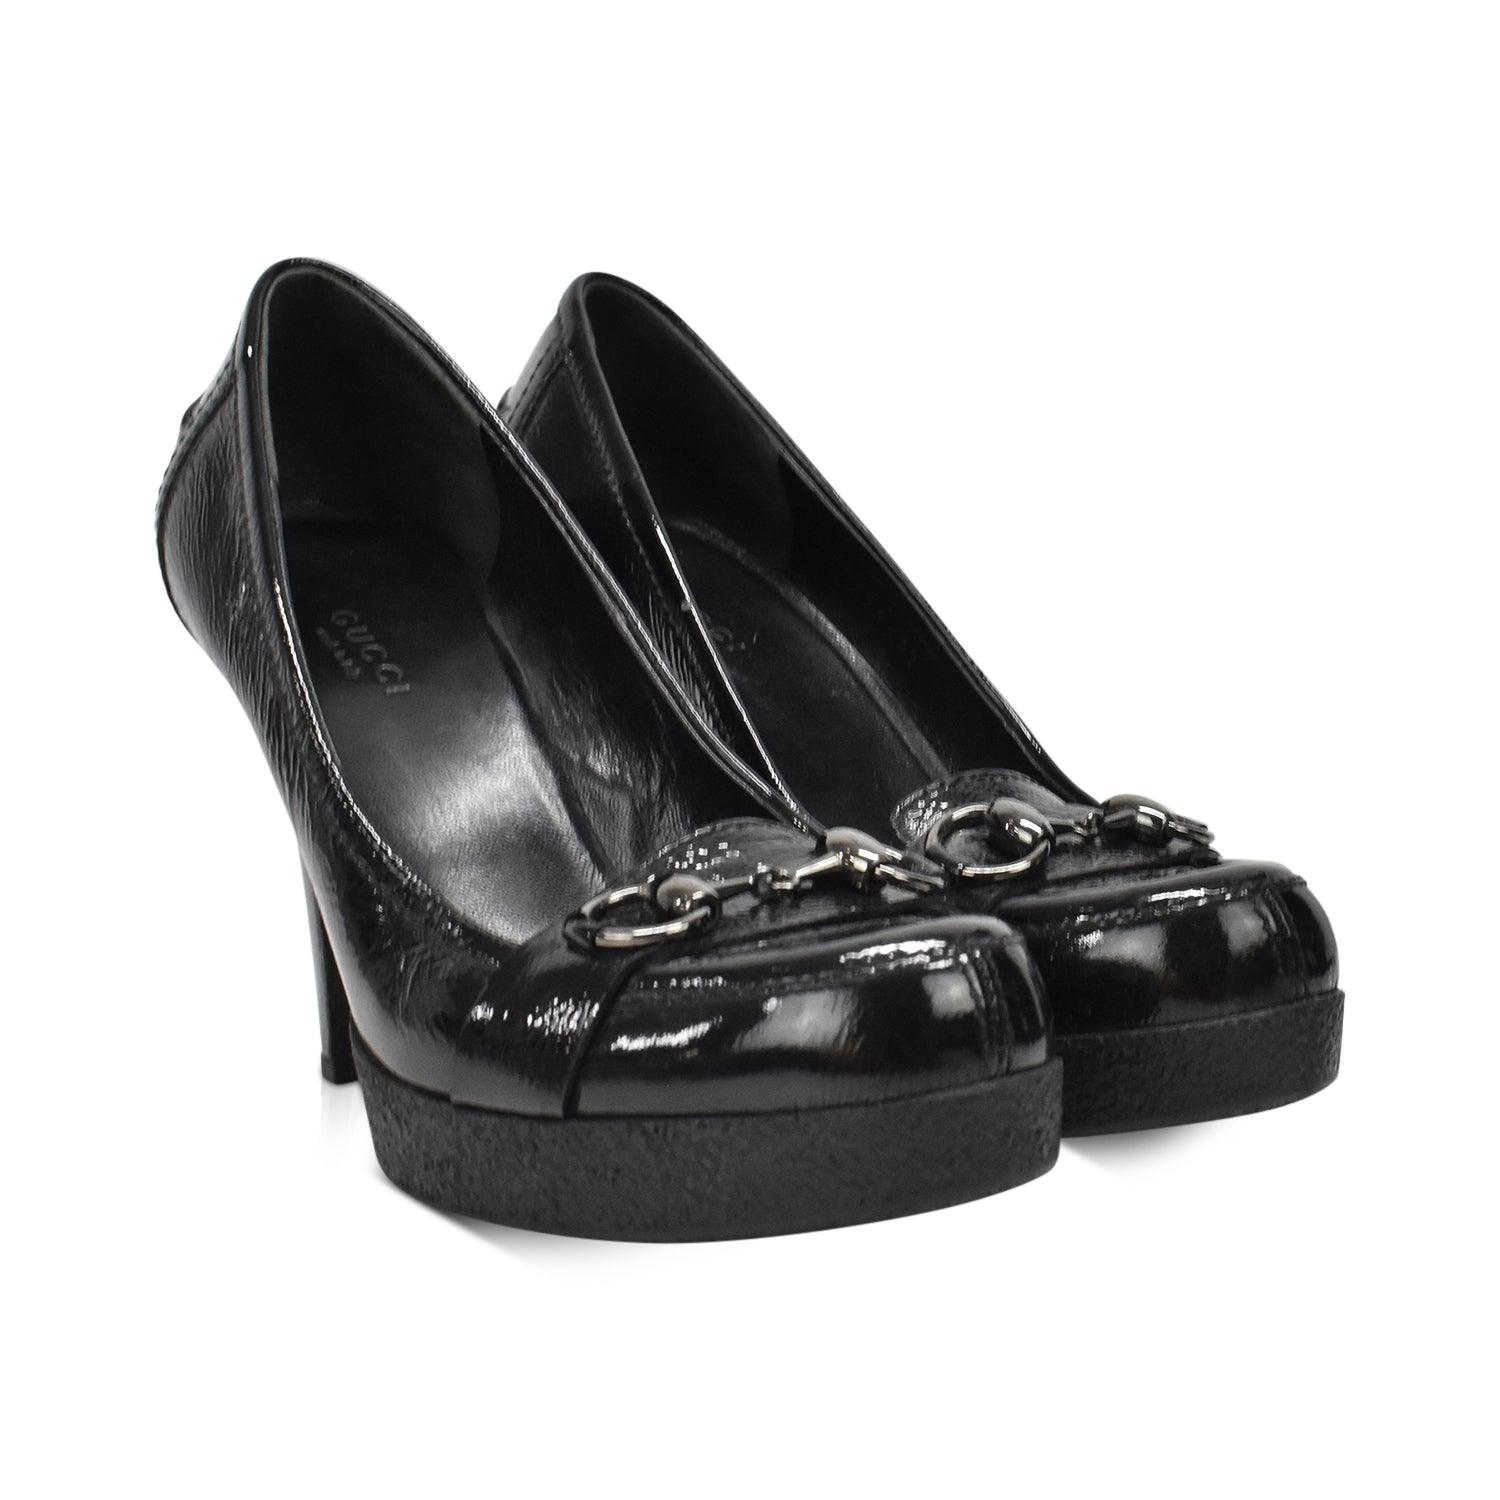 Gucci Pumps - Women's 37 - Fashionably Yours